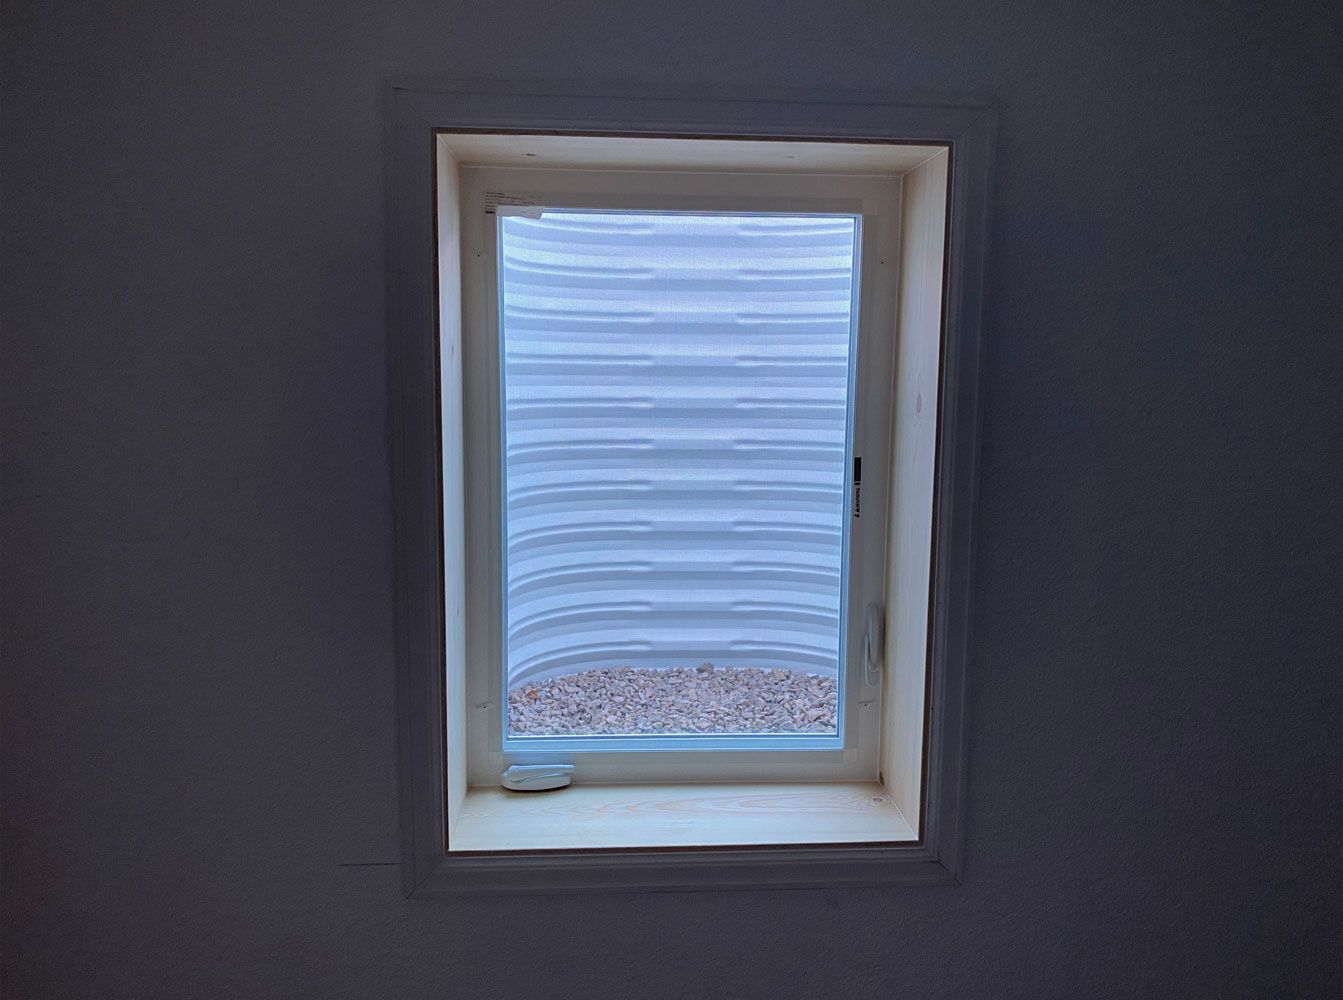 A window in a room with a striped window covering.